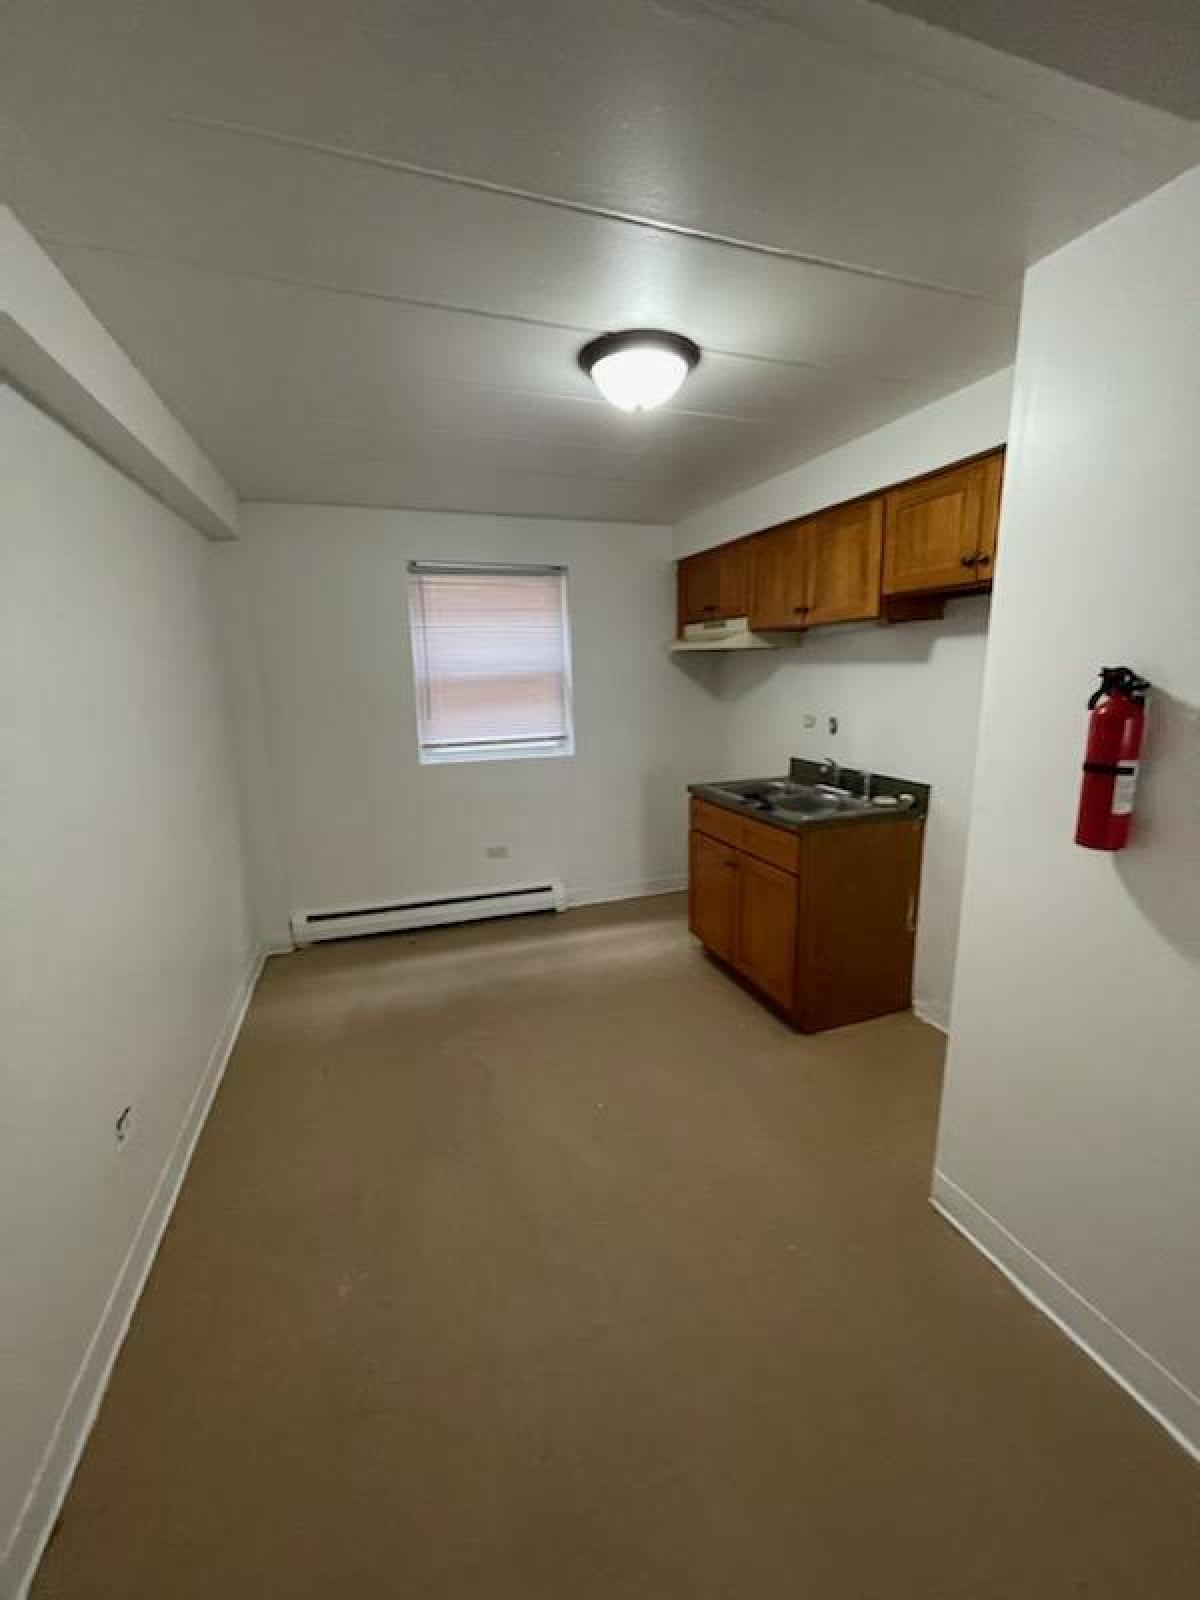 Picture of Apartment For Rent in Cicero, Illinois, United States